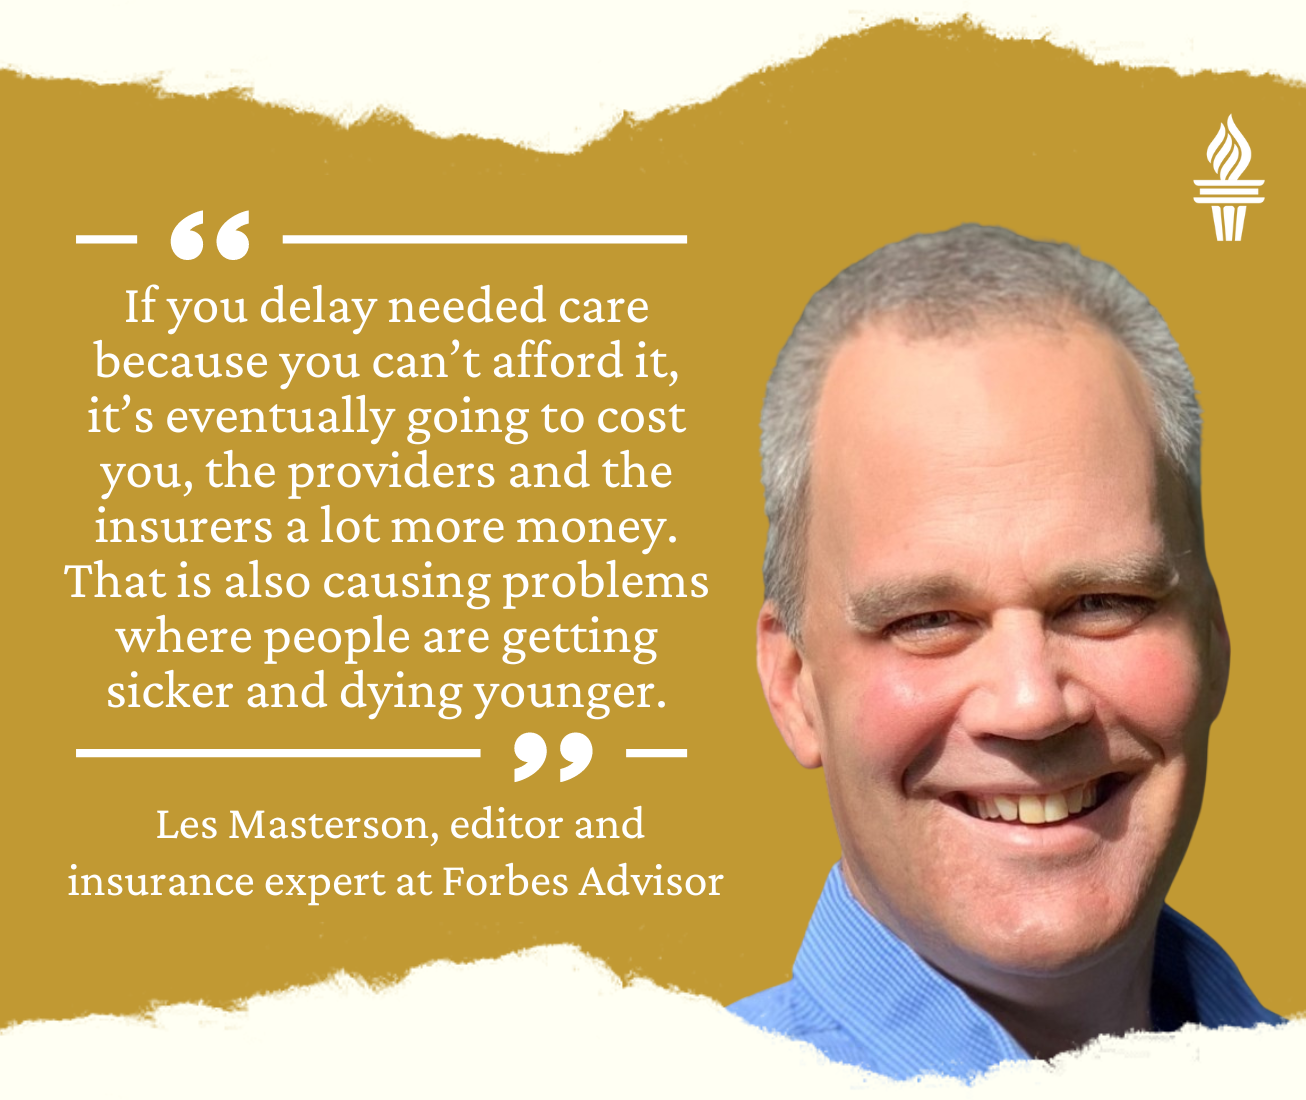 Quote from Les Masterson